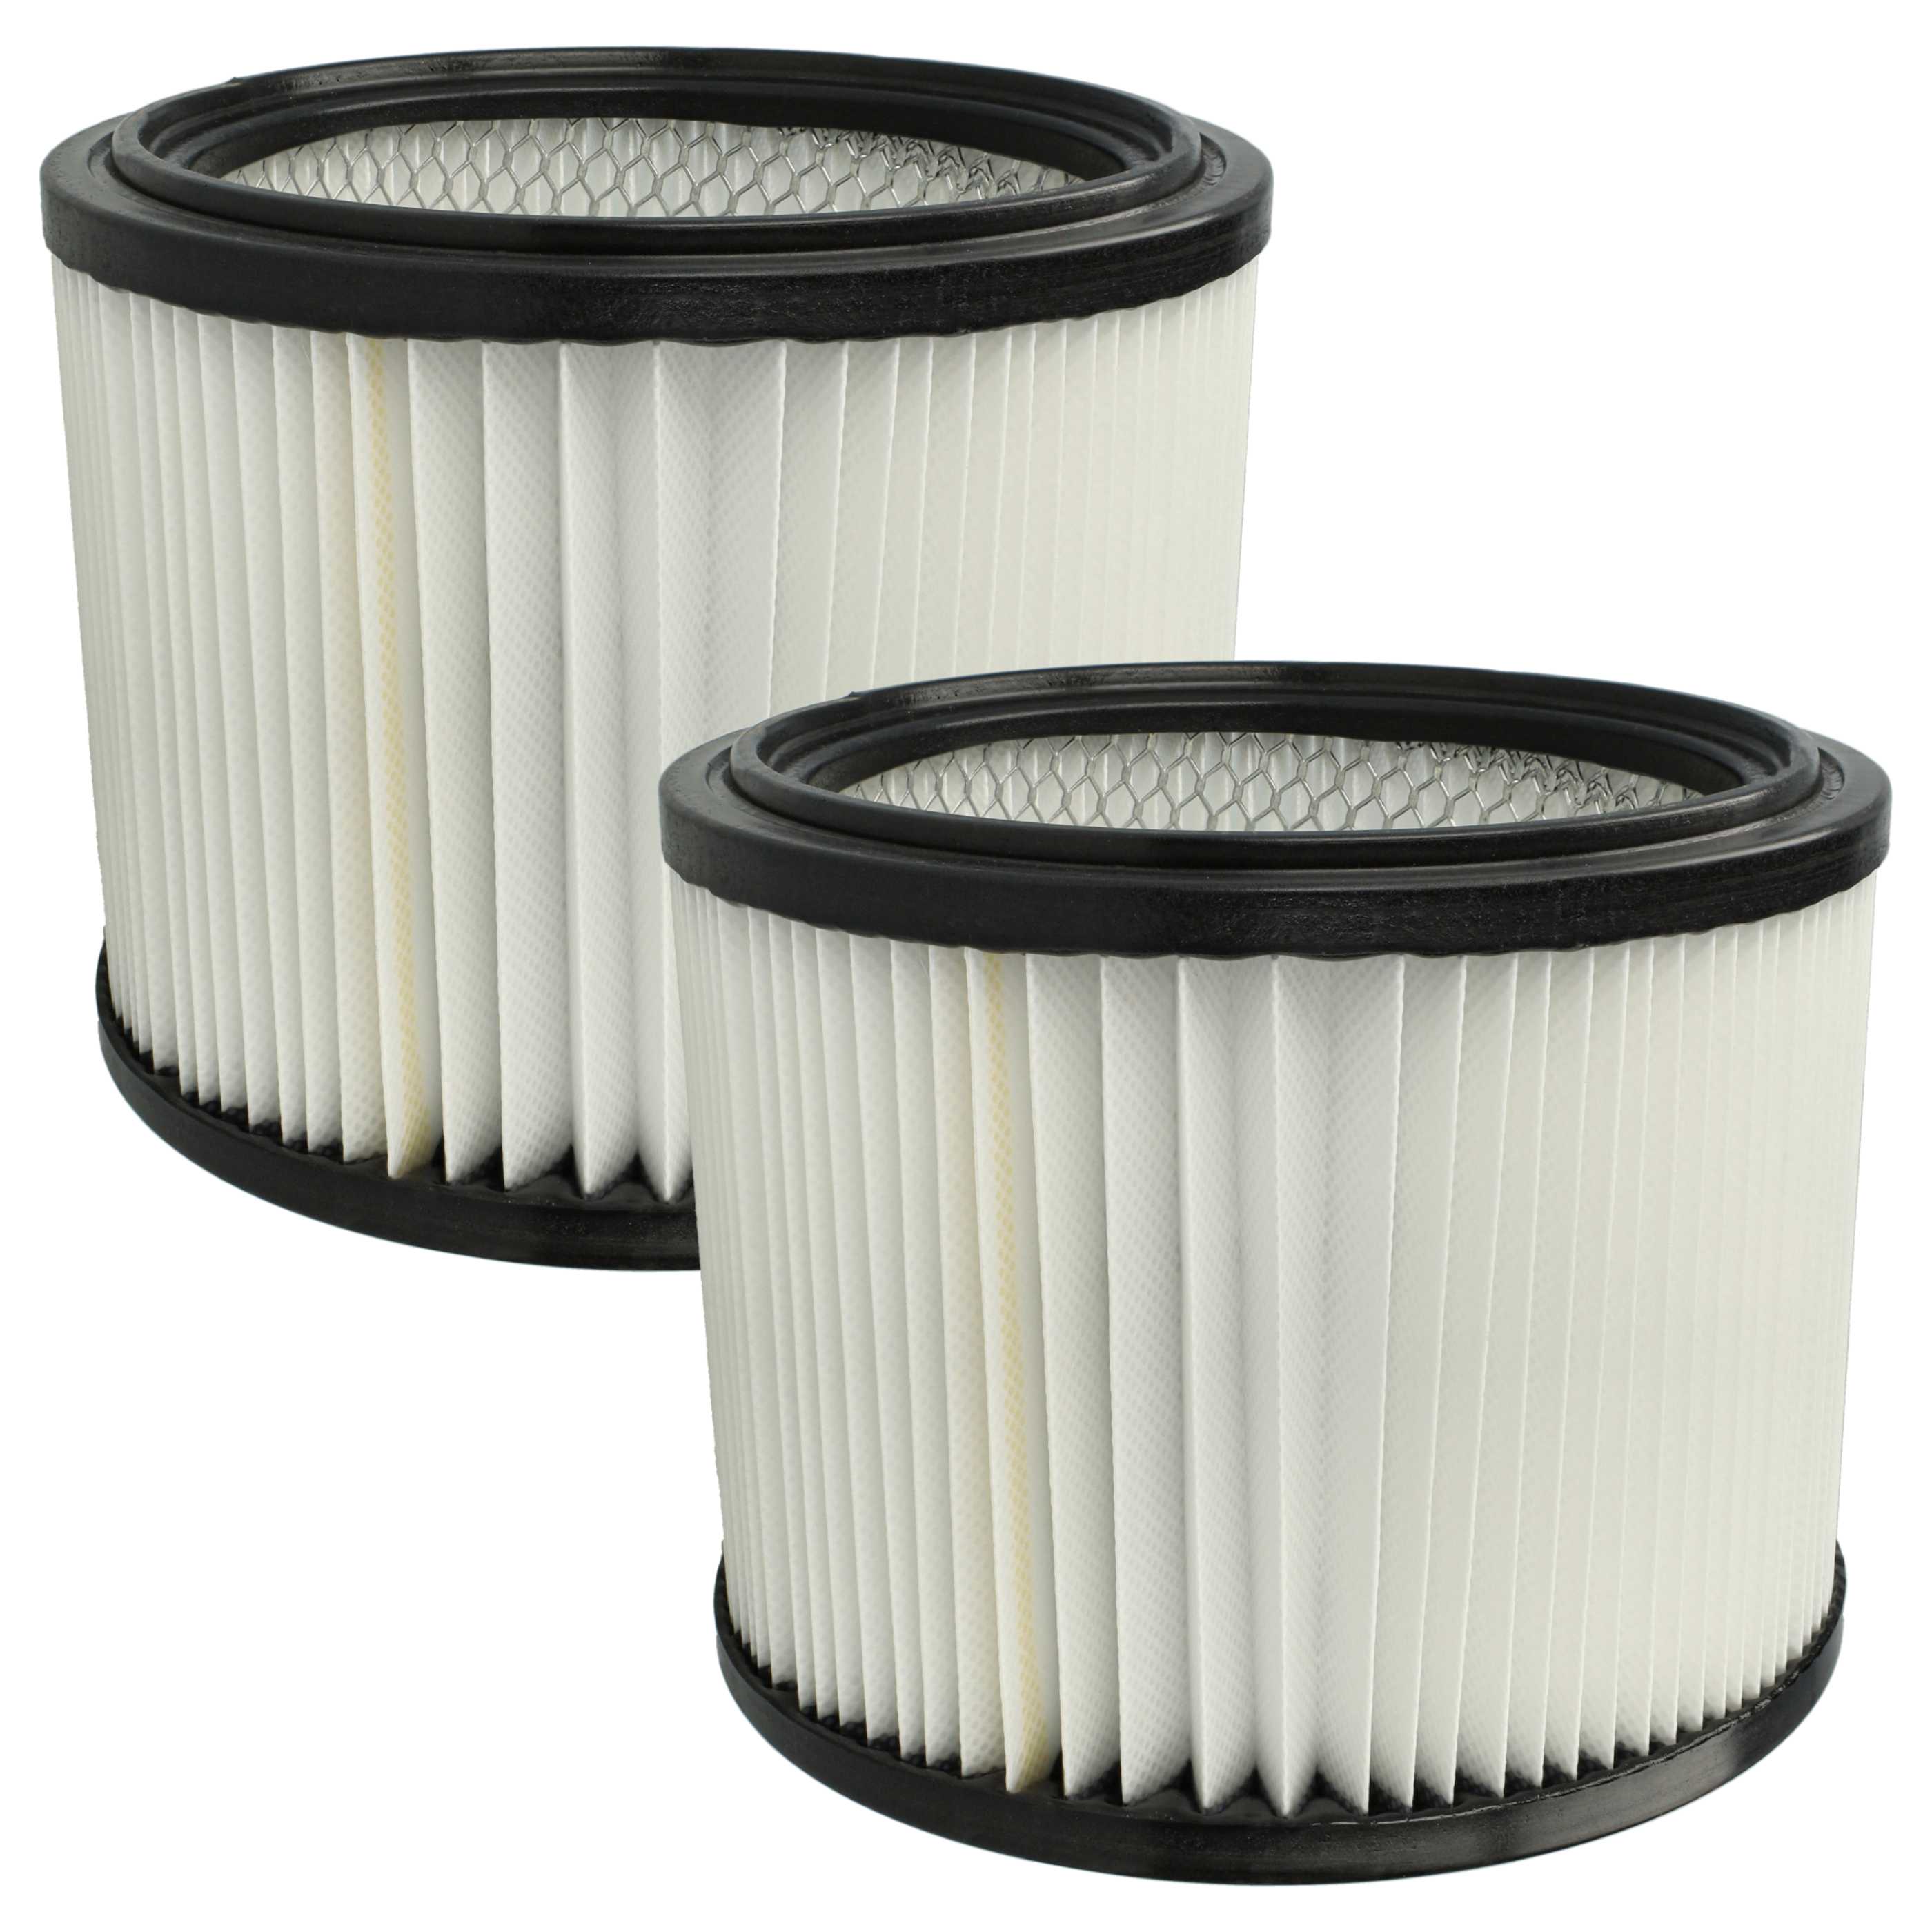 2x cartridge filter replaces Starmix FPP 5000 HEPA WS, 460475 for Starmix Vacuum Cleaner, black / white